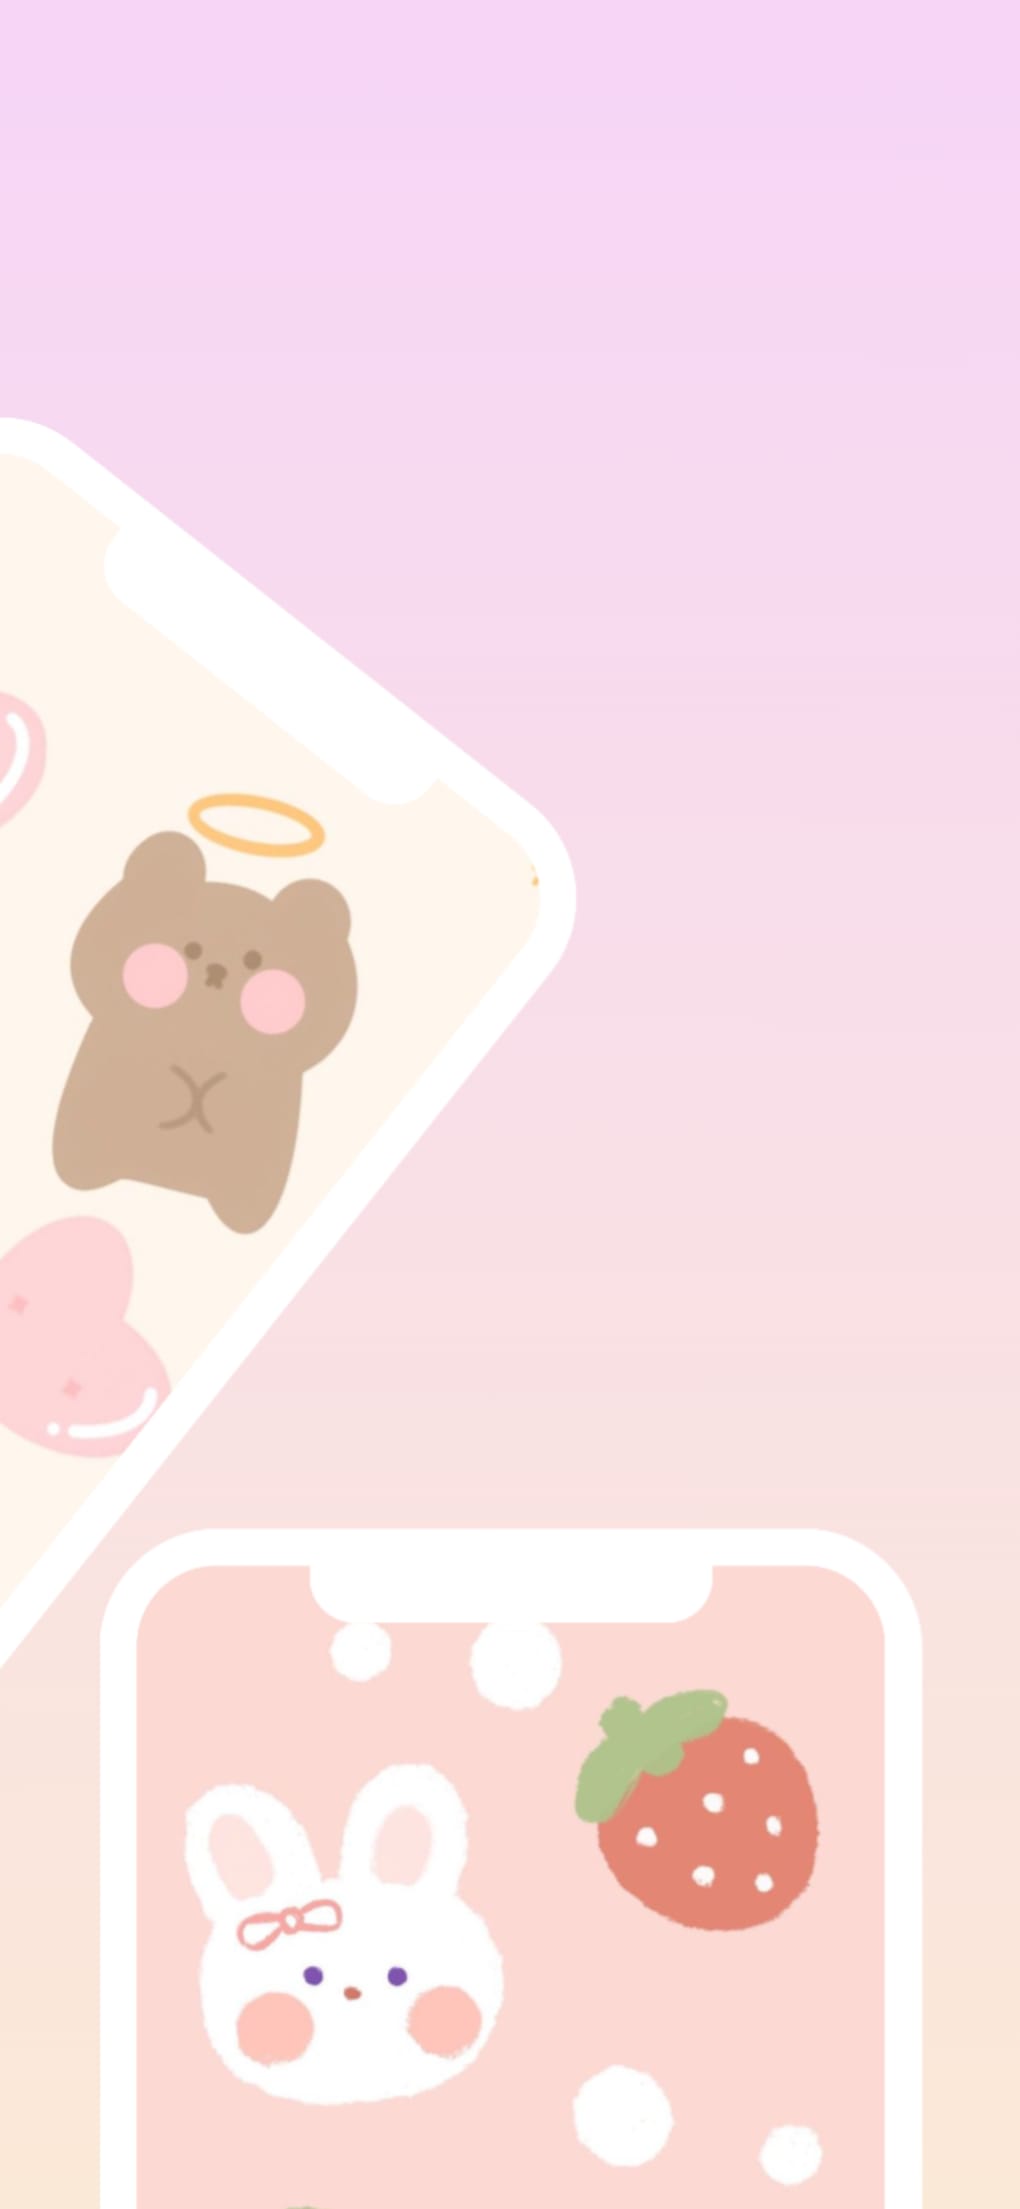 Aesthetic wallpaper for android phone with a pink background and cute animals. - Kawaii